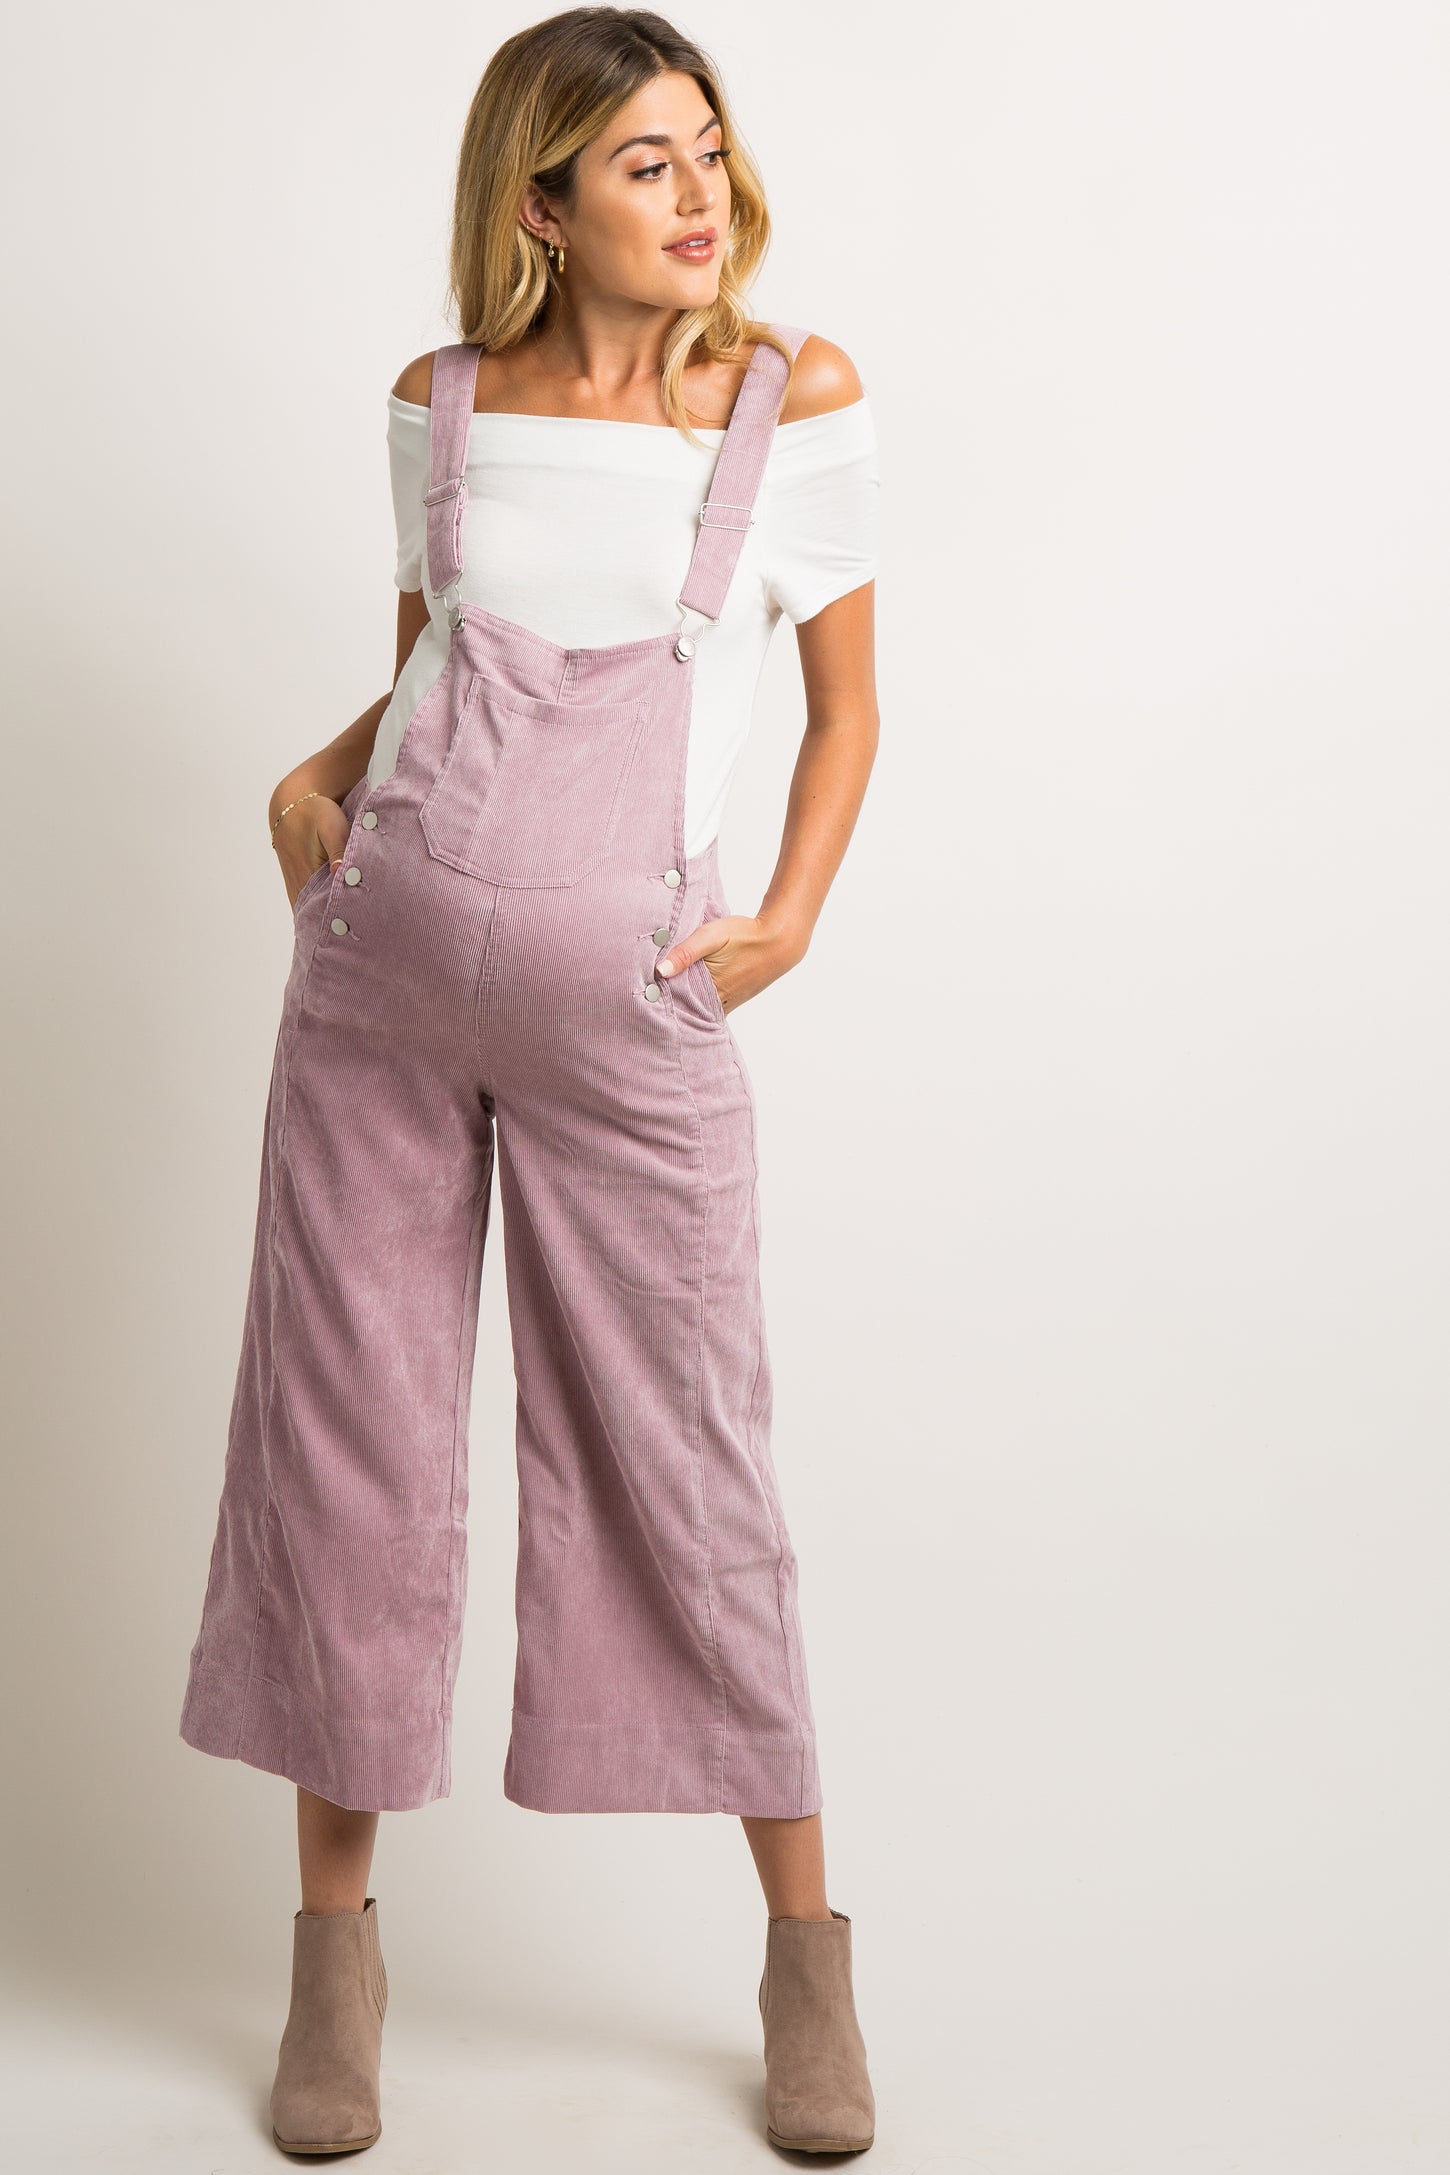 Pink Corduroy Pocket Front Maternity Overalls